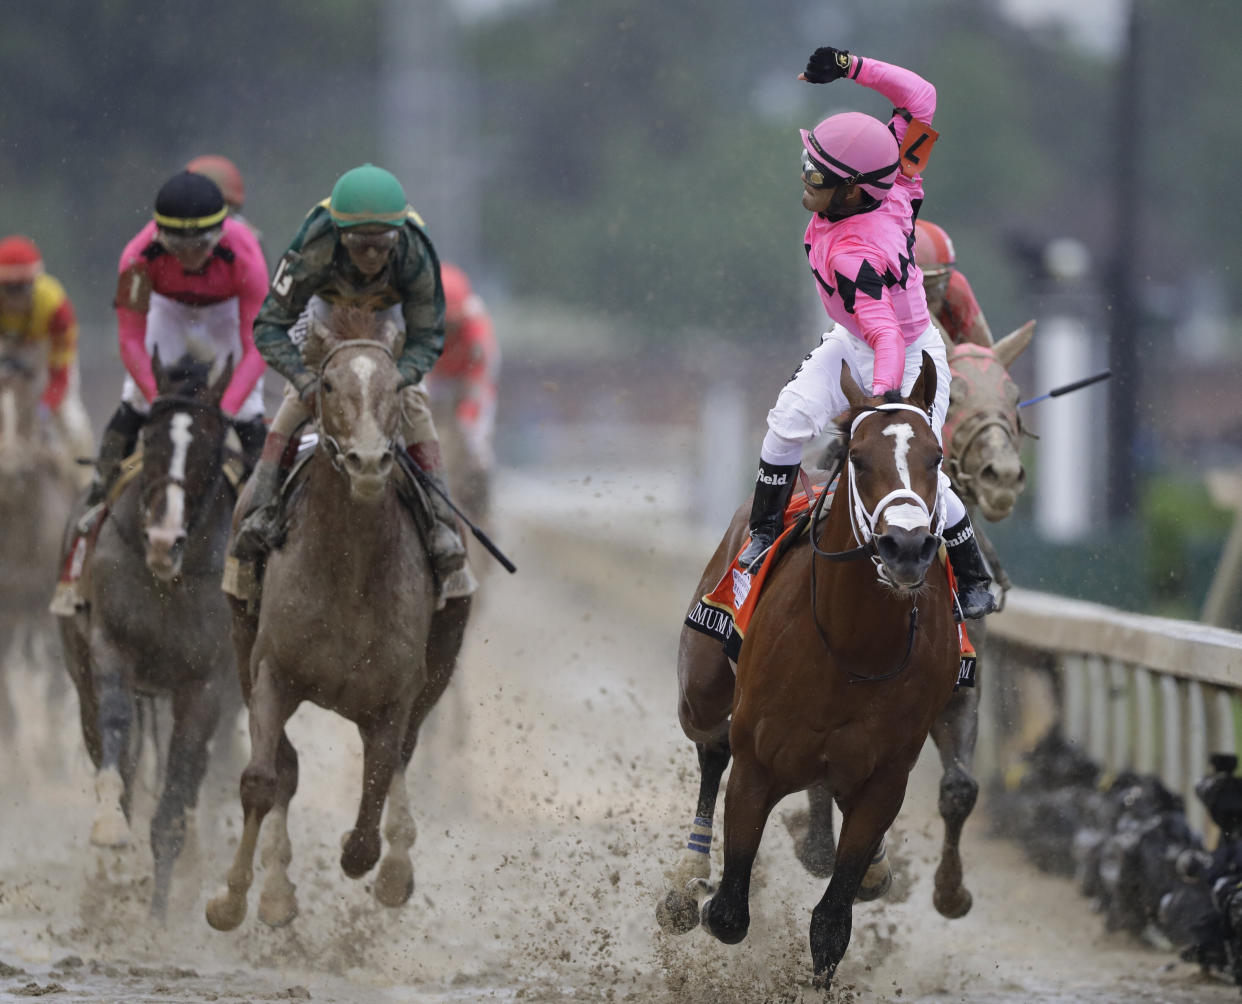 Country House, the second horse to cross the finish line, was declared winner of the Kentucky Derby. (ASSOCIATED PRESS)